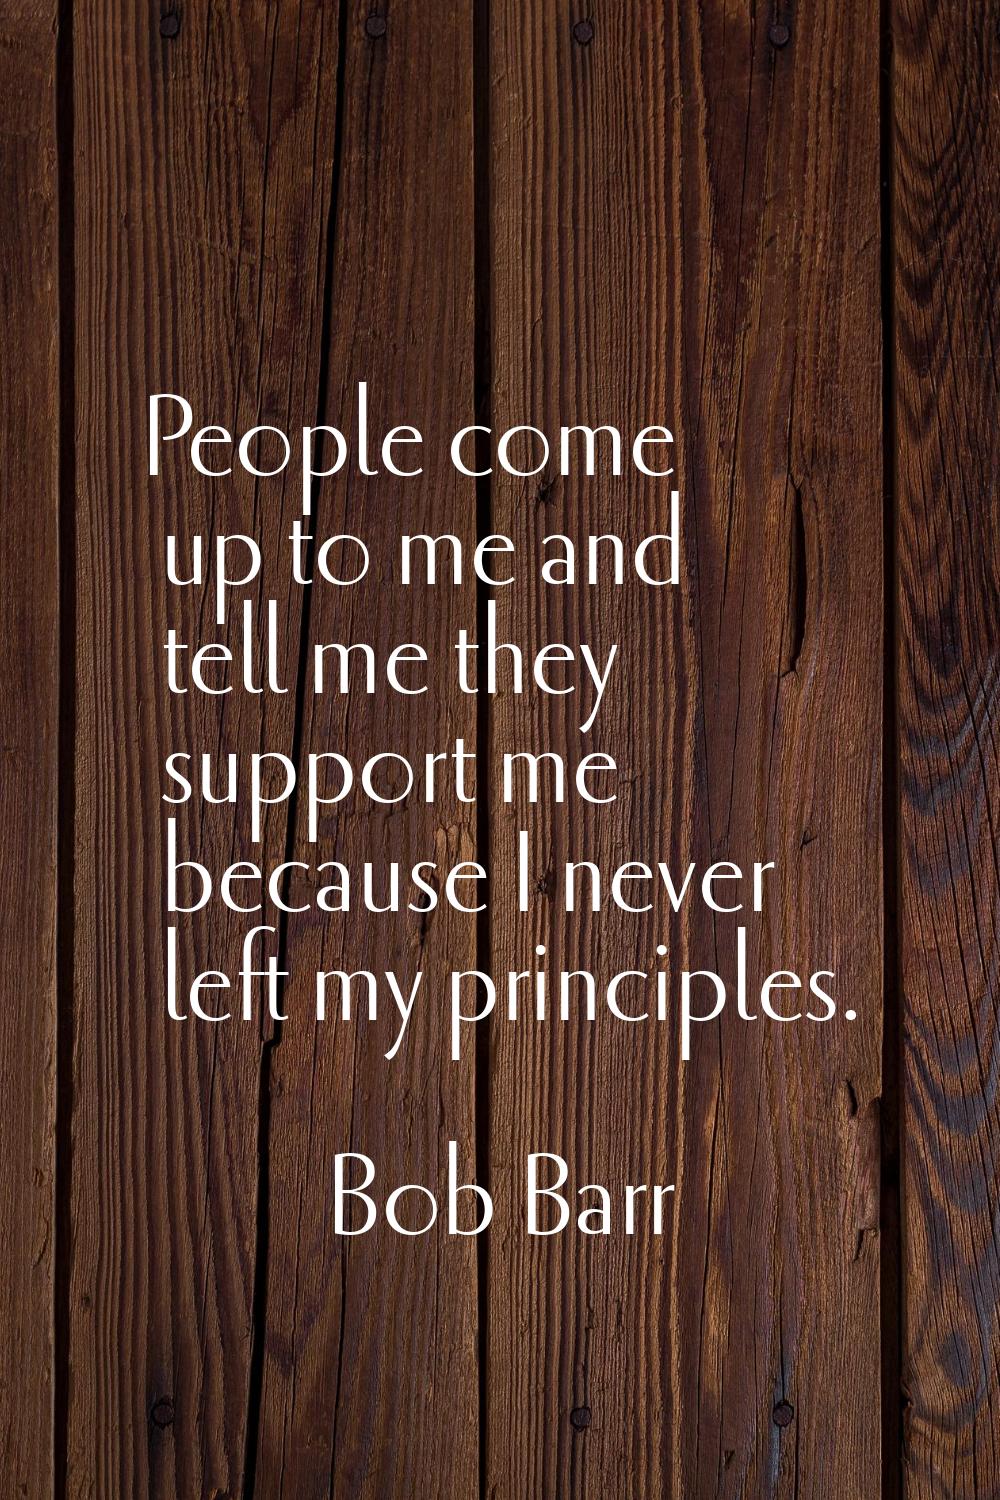 People come up to me and tell me they support me because I never left my principles.